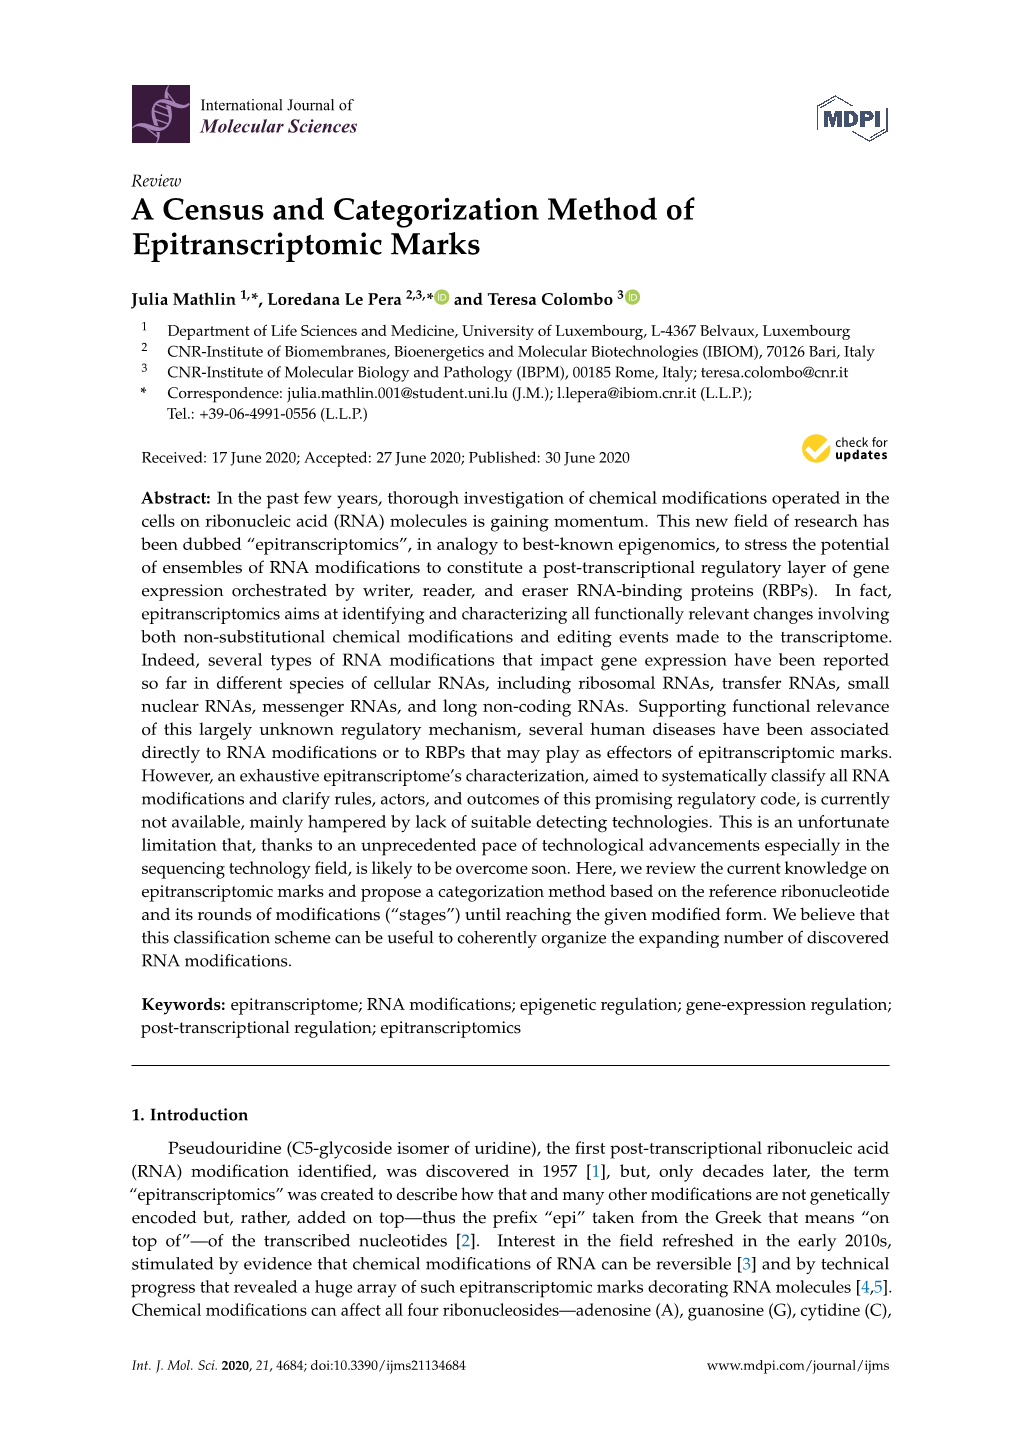 A Census and Categorization Method of Epitranscriptomic Marks